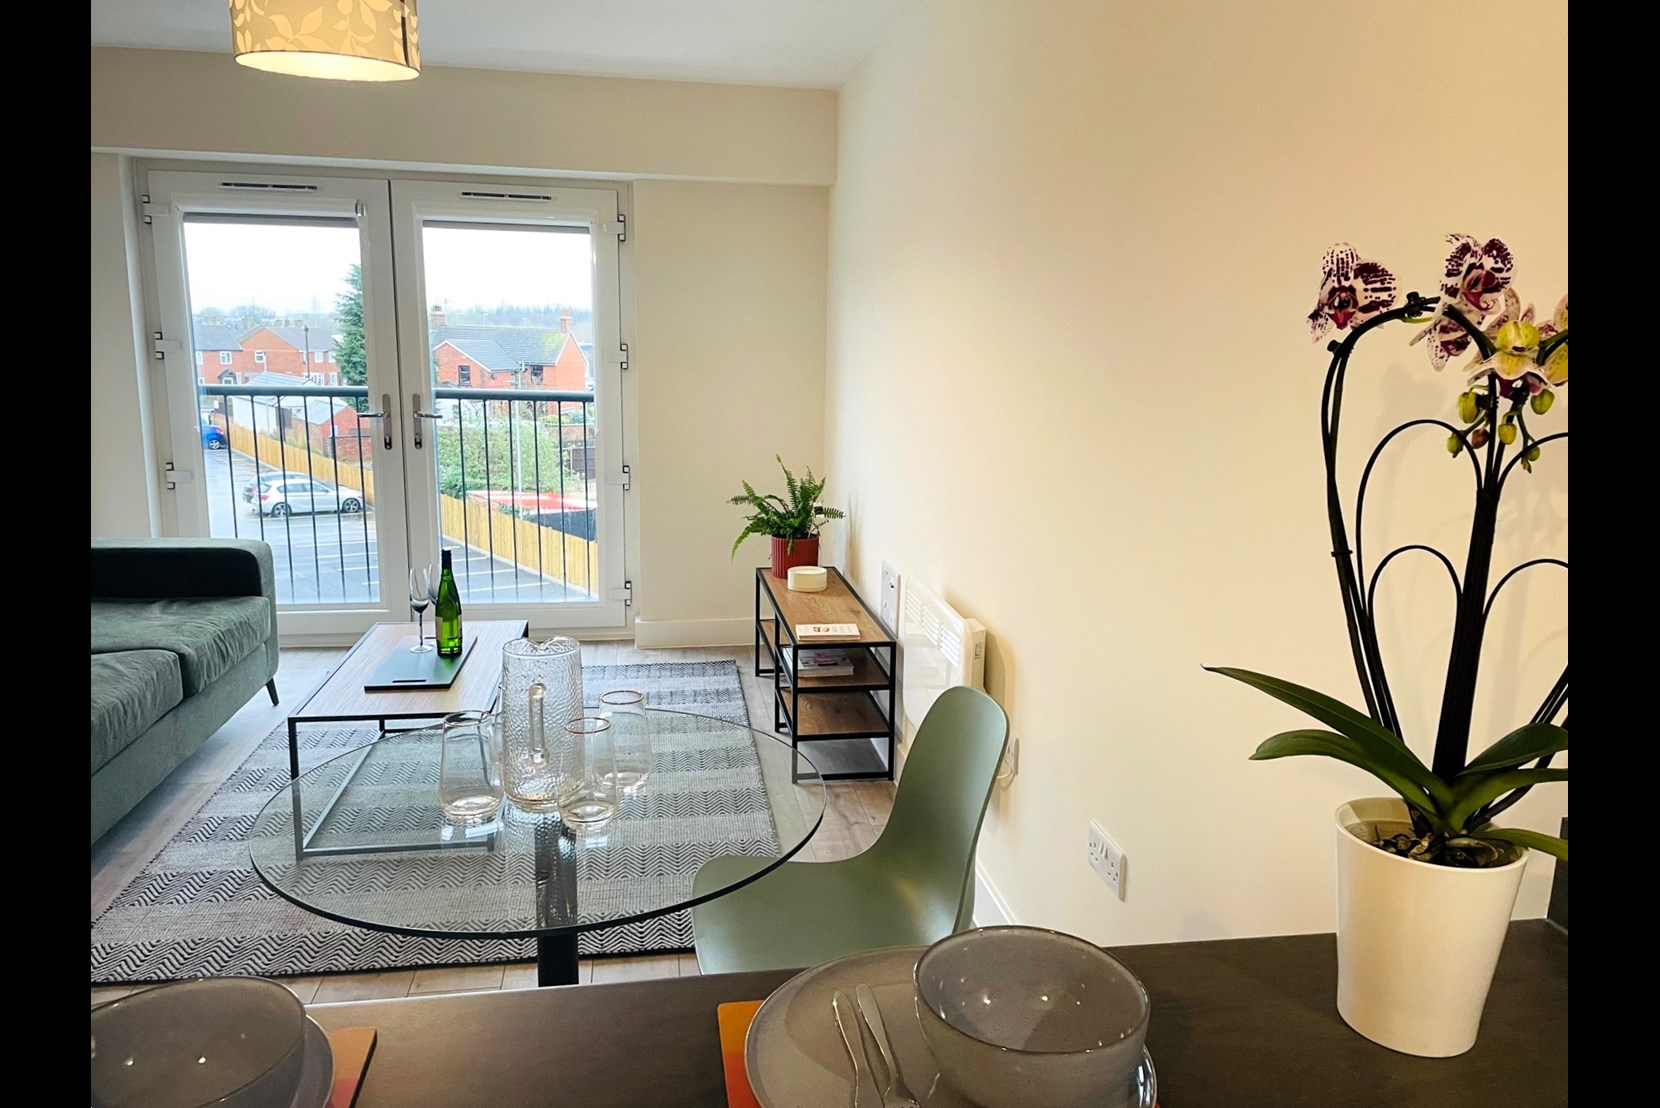 Apartments to Rent by Una Living in Hunslet House, Corby, NN17, living dining area